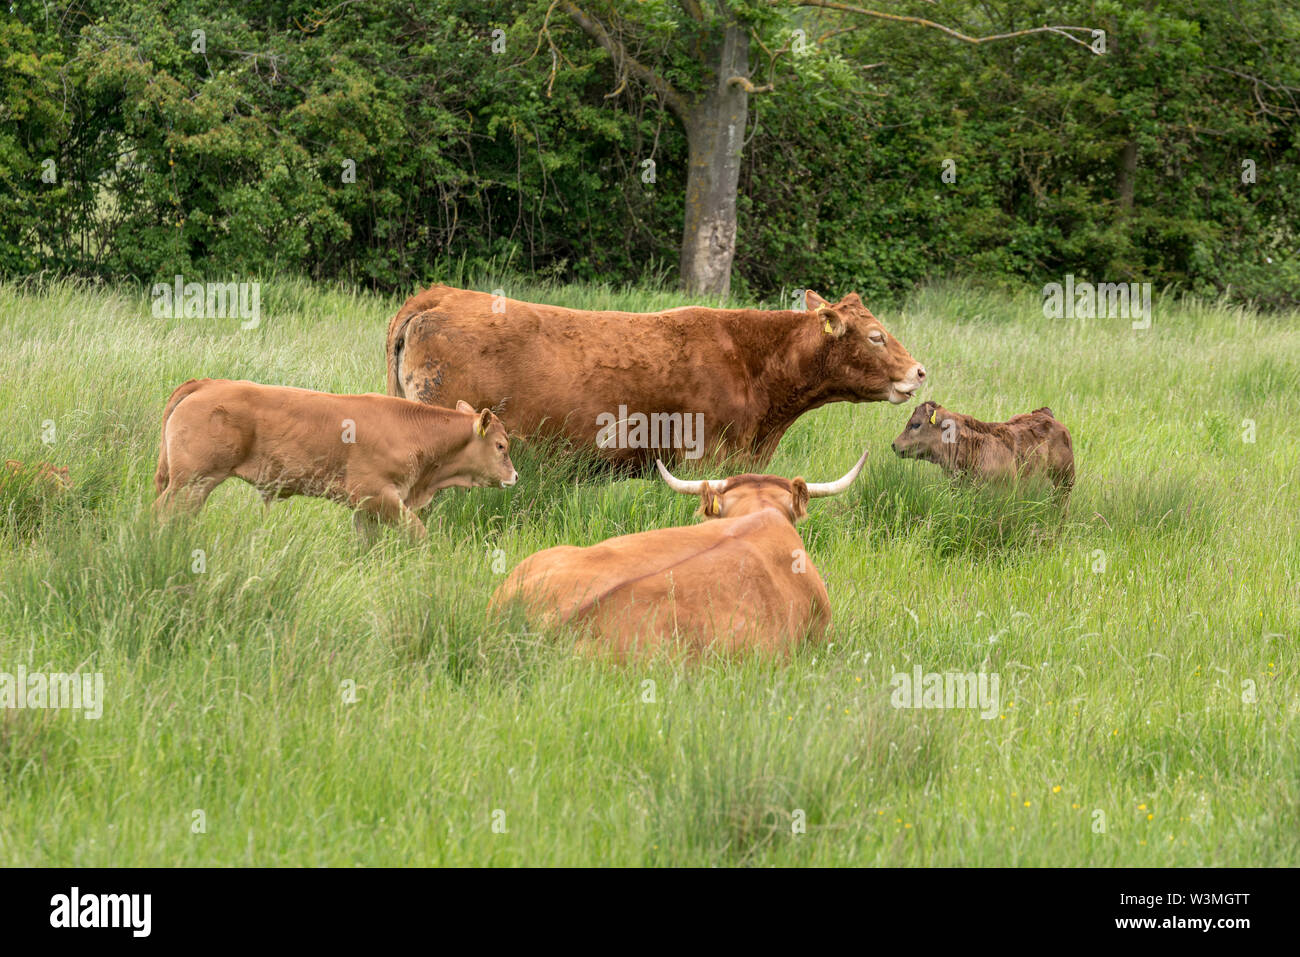 Red Angus cows and calf in a field, Red Angus cattle. Stock Photo